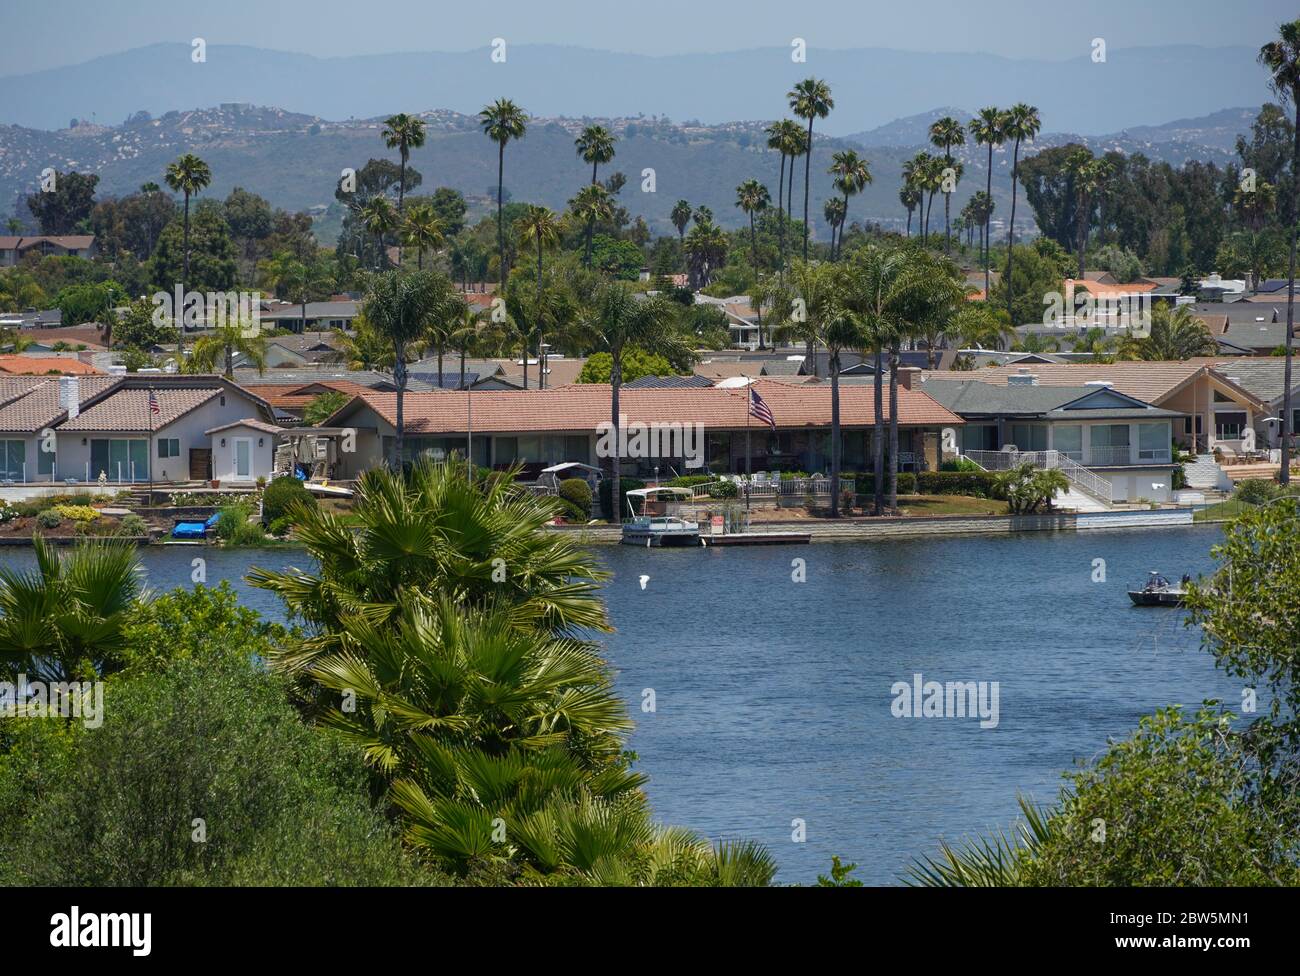 View across Lake San Marcos in San Diego County, California to shoreline residences and distant mountains. Pontoon boat, dock, palm trees, sunny. Stock Photo